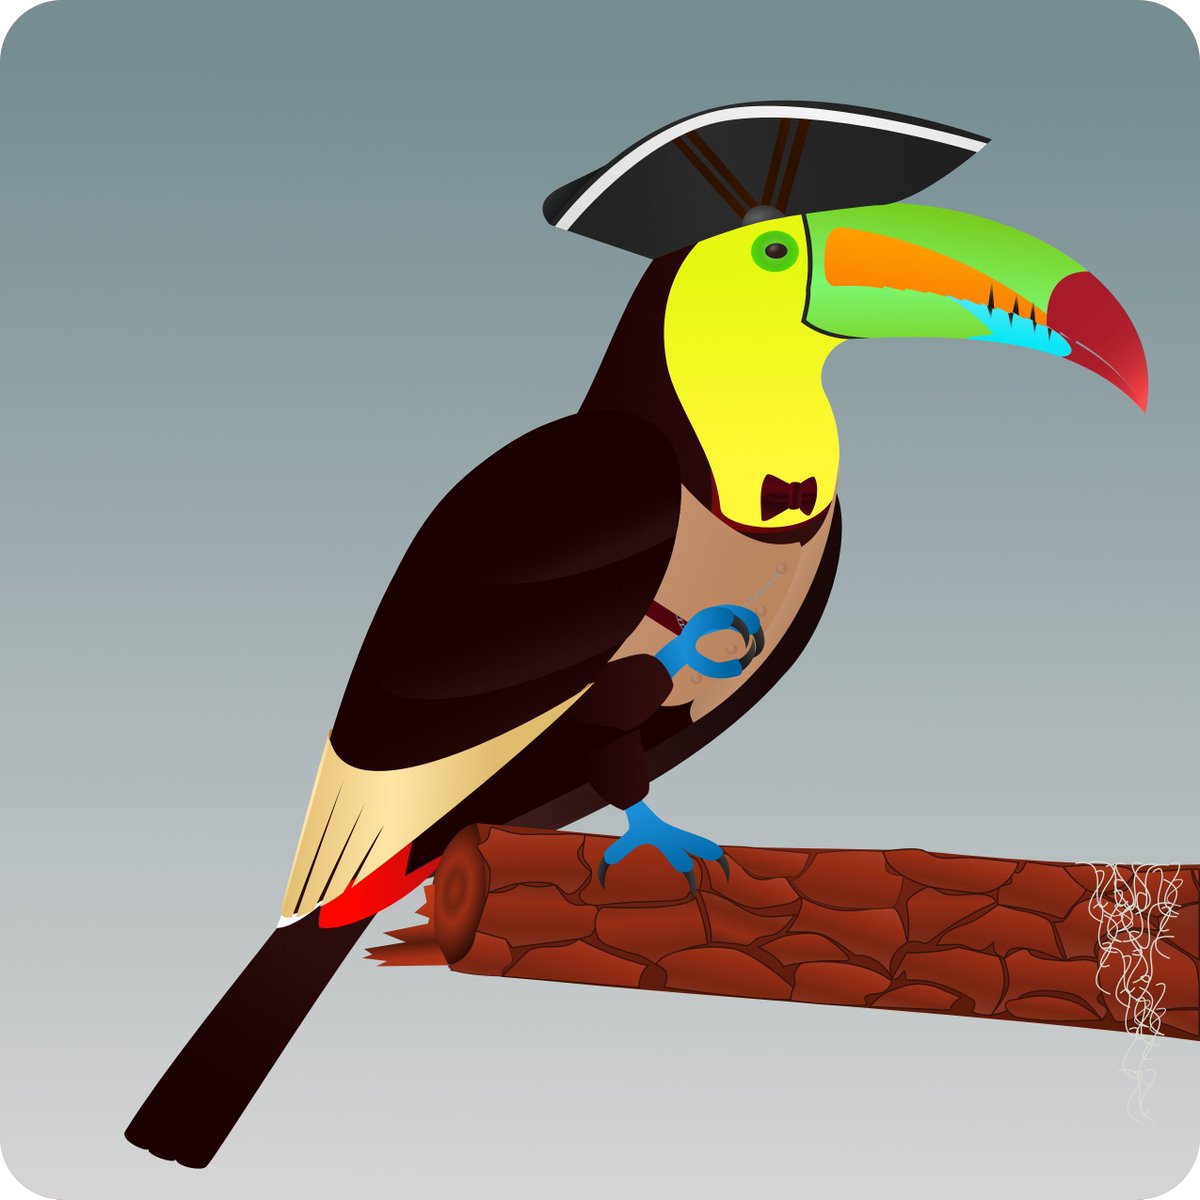 And for our third species we stayed tropical with the Keel-billed Toucan. A large omnivorous bird that lives in the jungles of Central and South America. It is the national bird of #Belize.  Keep a look out for individuals with rare colors. 
#NFTreveal #toucan #digitalart